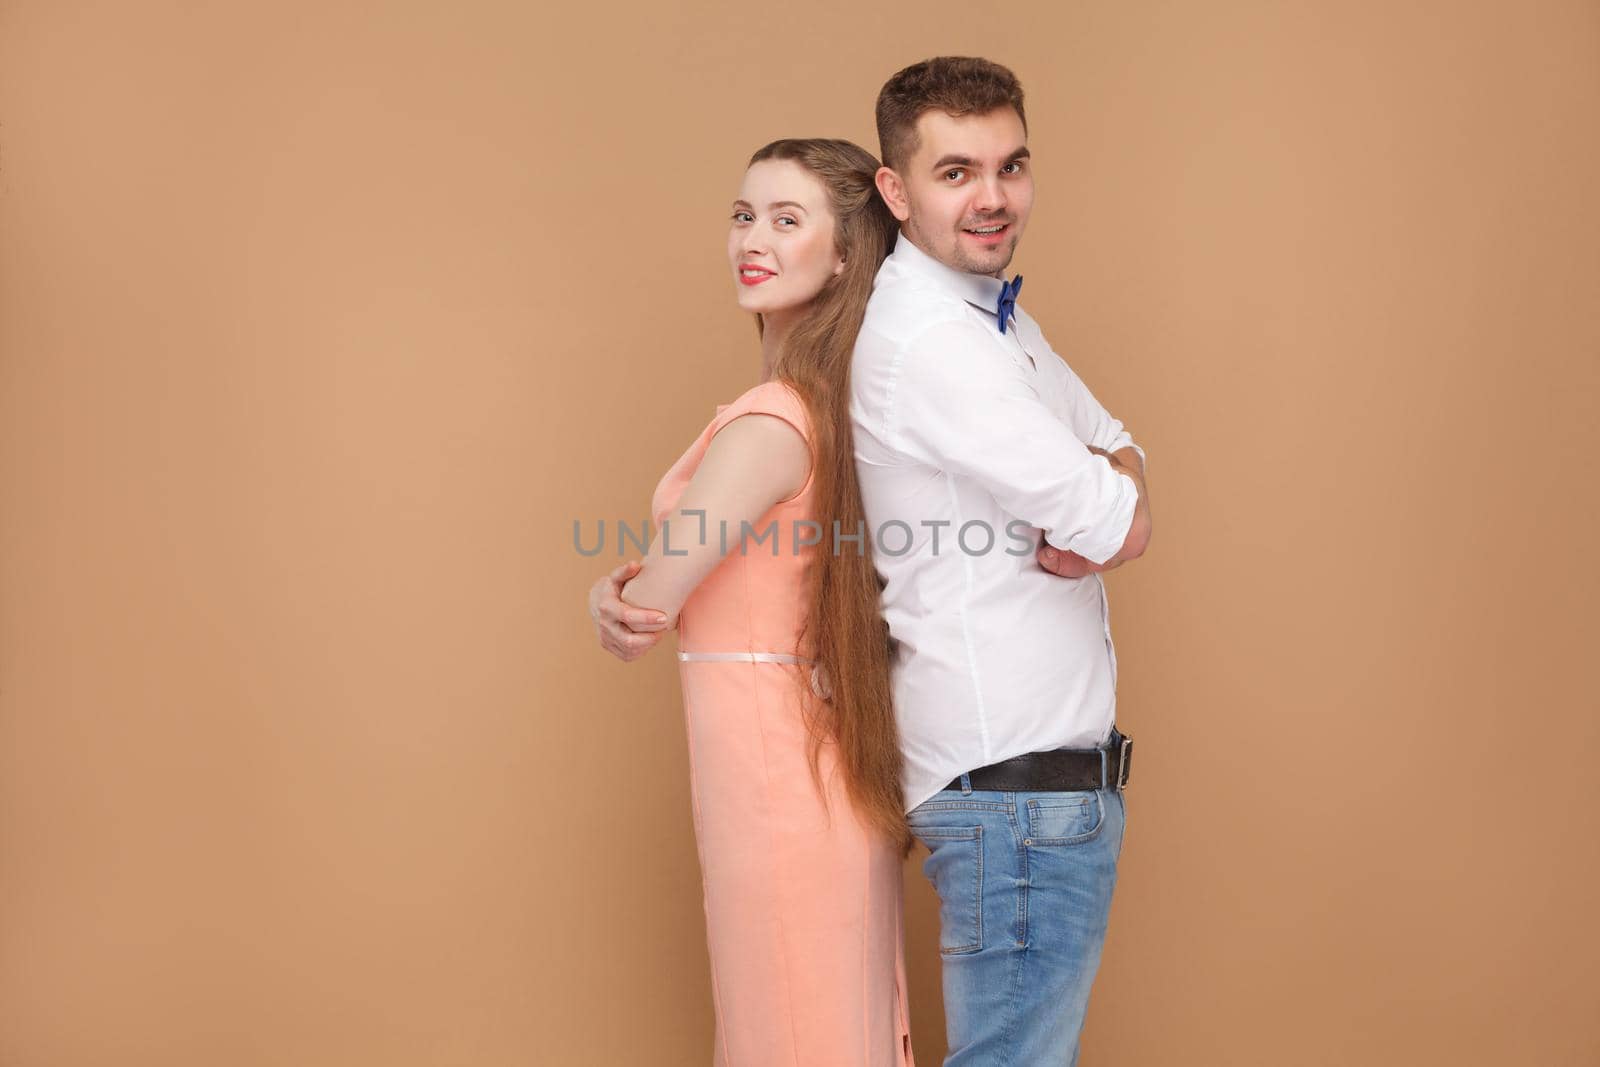 Profile side view of back to back man in casual style and beautiful woman in pink dress, looking at camera with toothy smile and crossed hands. indoor studio shot, isolated on brown background.